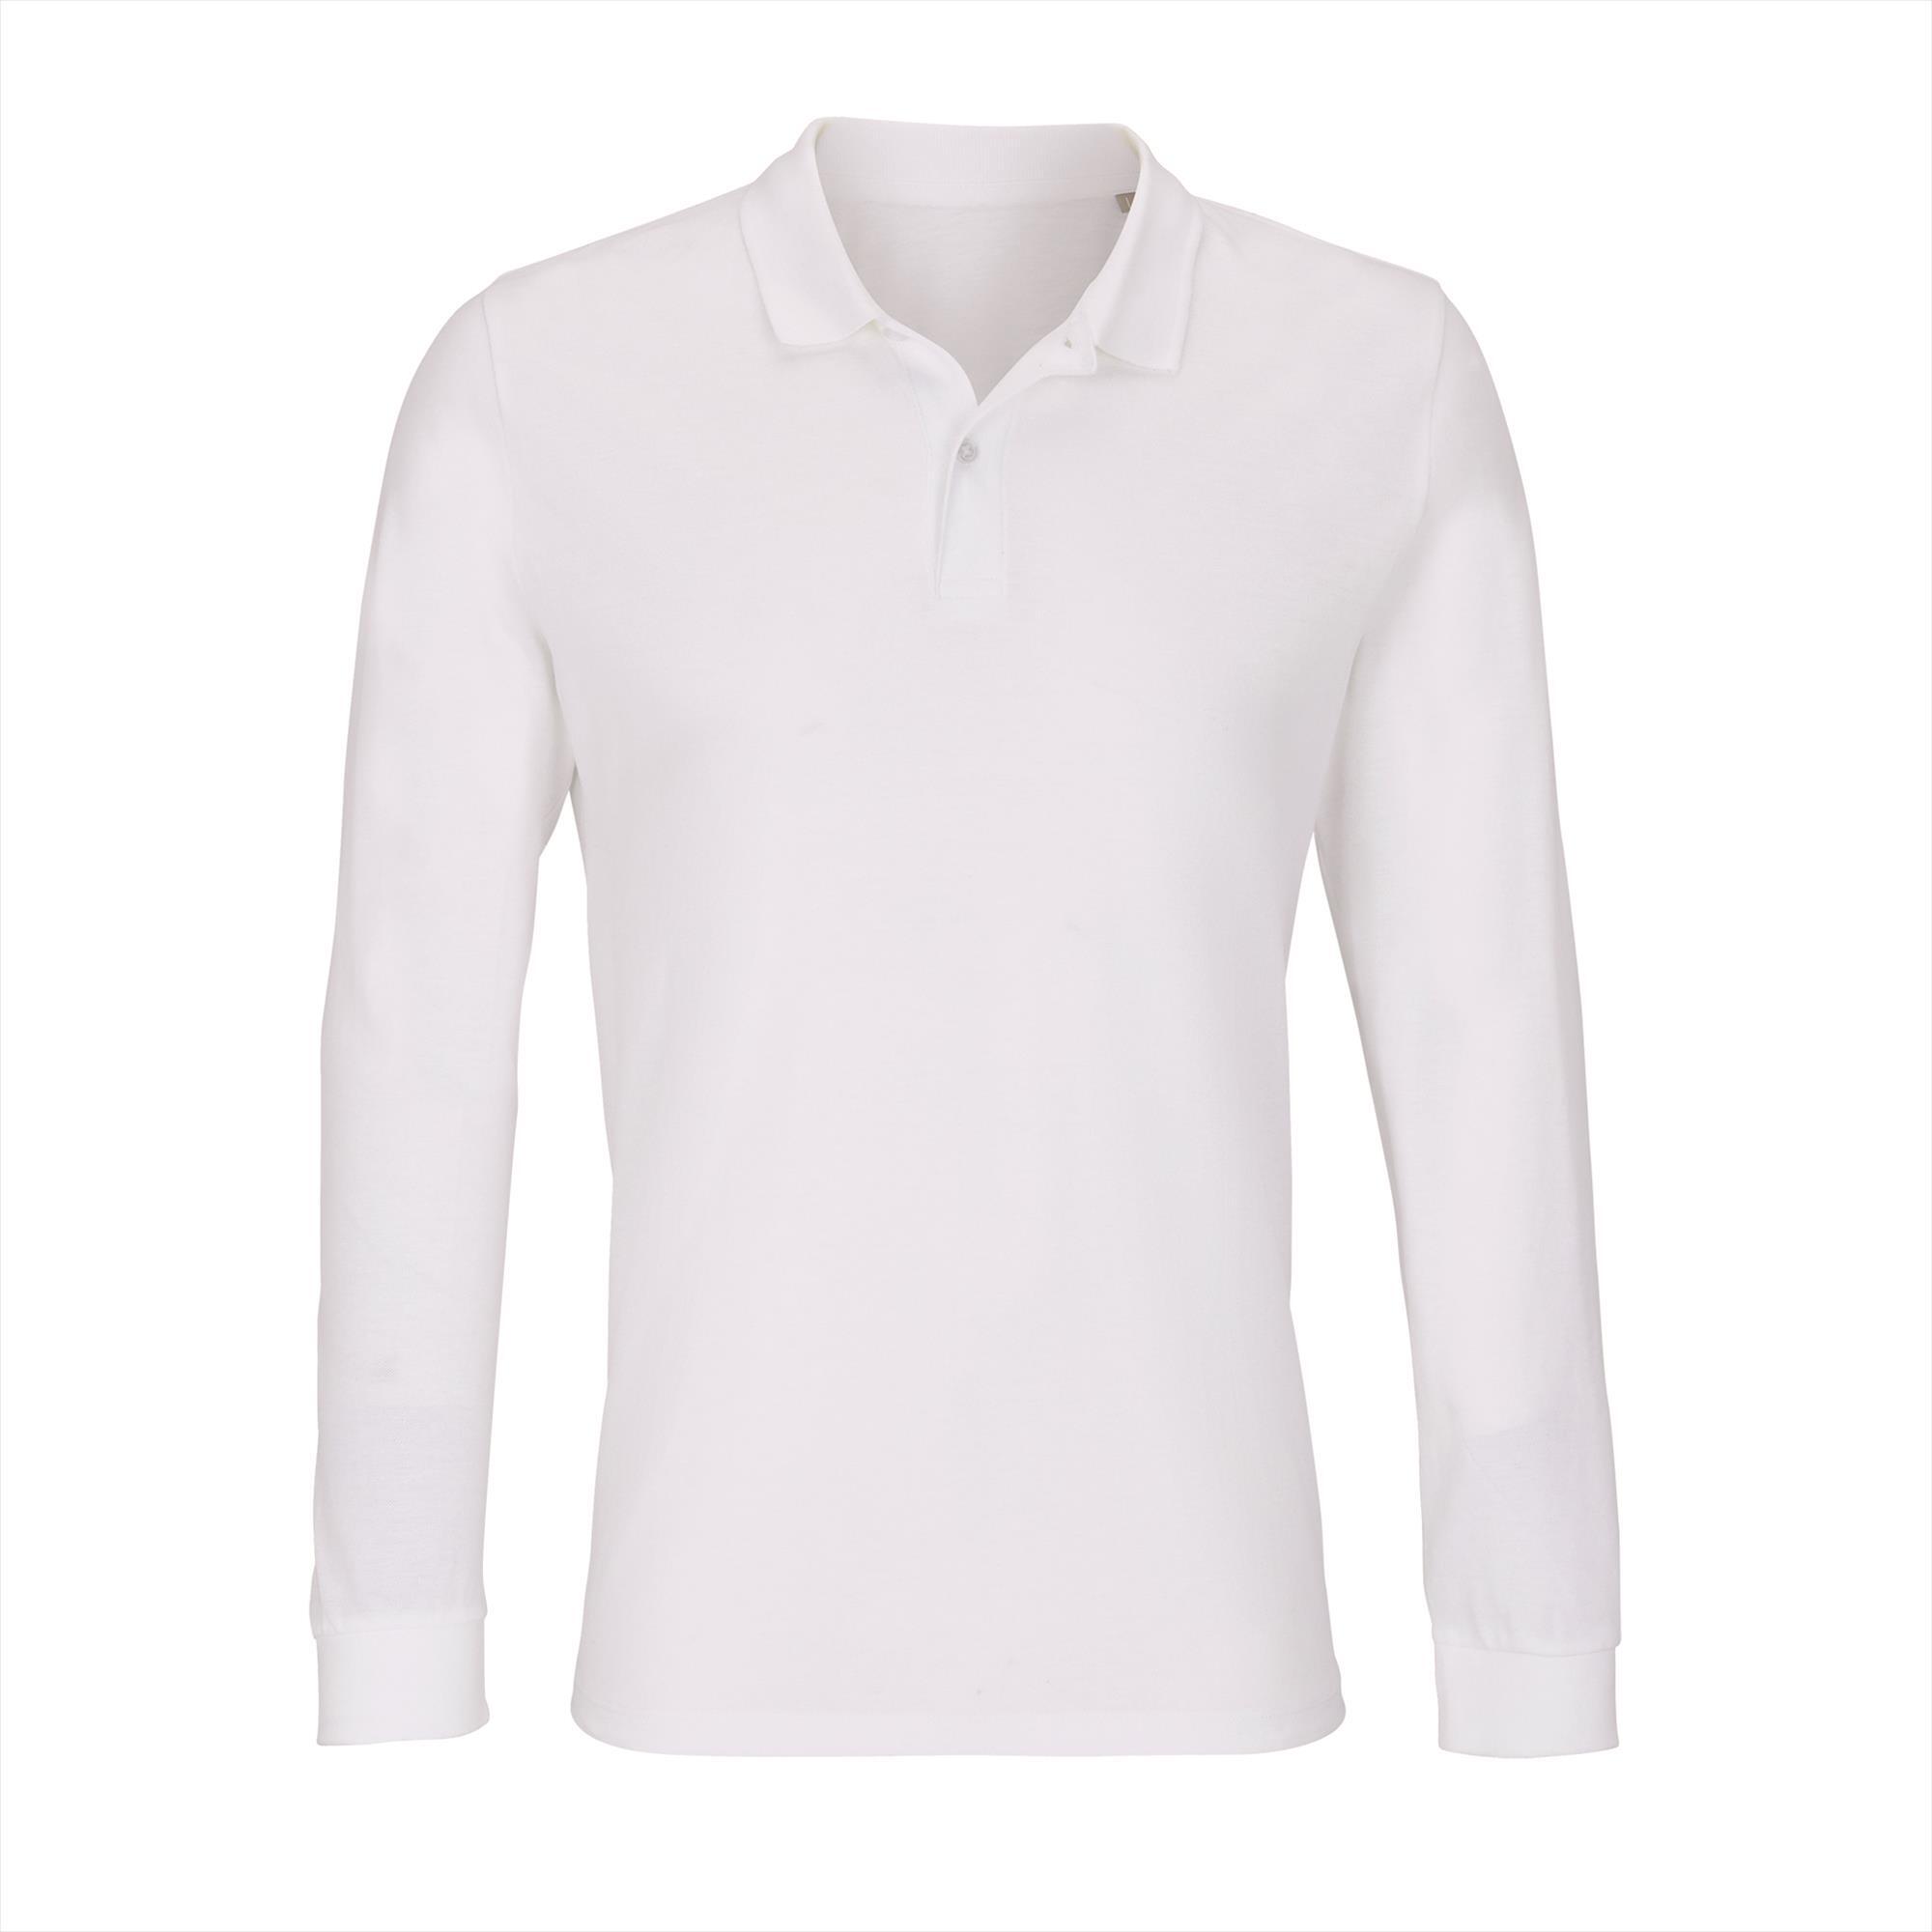 Poloshirt wit voor mannen lange mouw polo